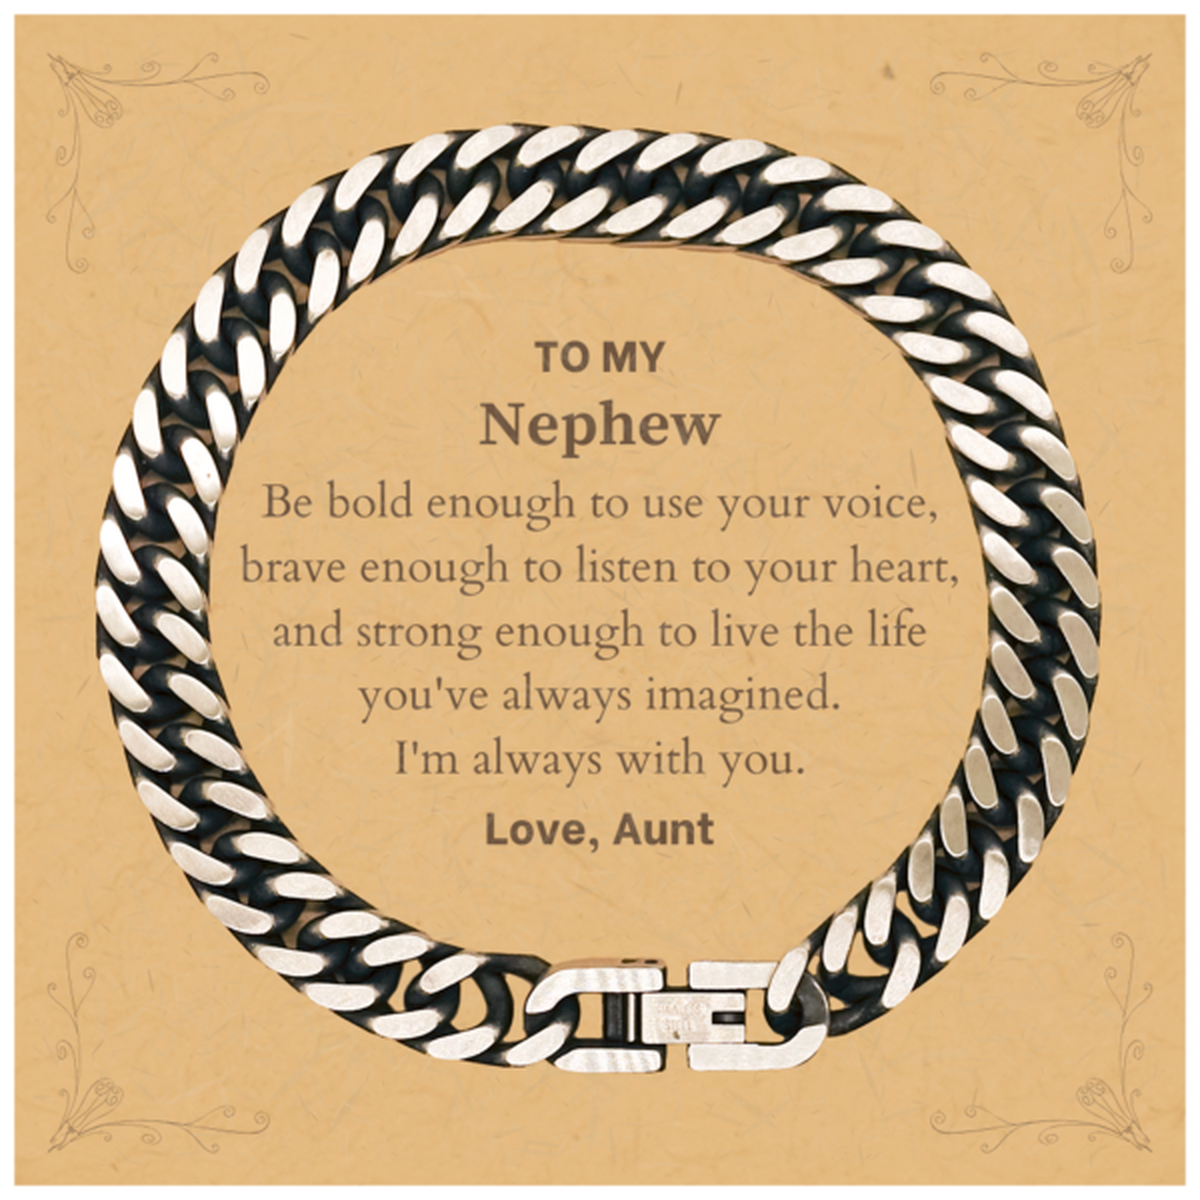 Keepsake Nephew Cuban Link Chain Bracelet Gift Idea Graduation Christmas Birthday Nephew from Aunt, Nephew Be bold enough to use your voice, brave enough to listen to your heart. Love, Aunt